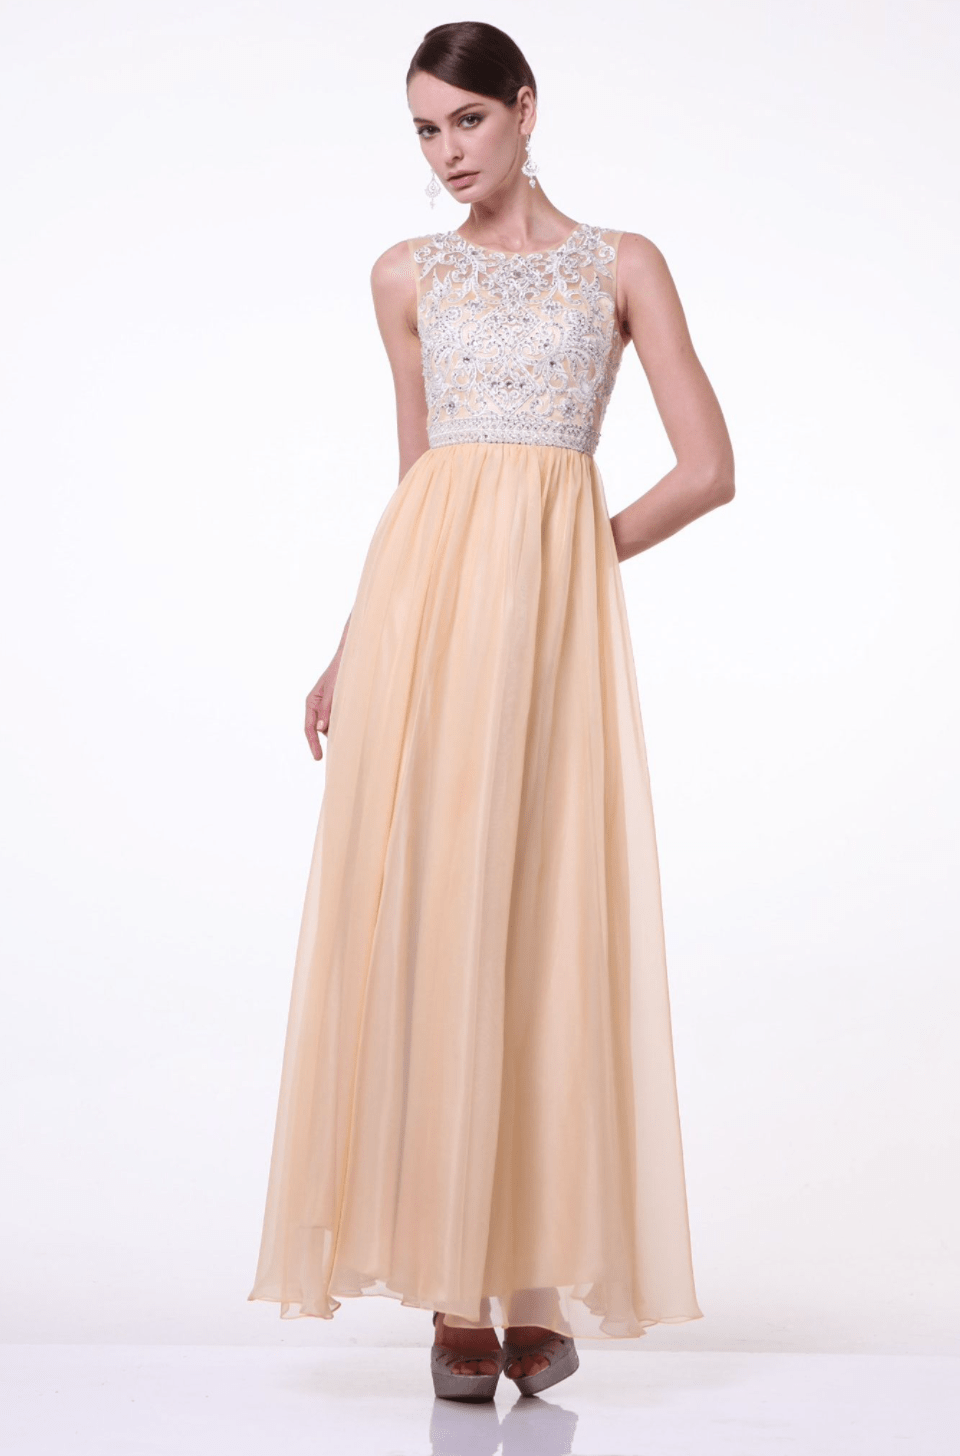 Champagne Crystal & Chiffon Long Dress by Ladivine - NORMA REED